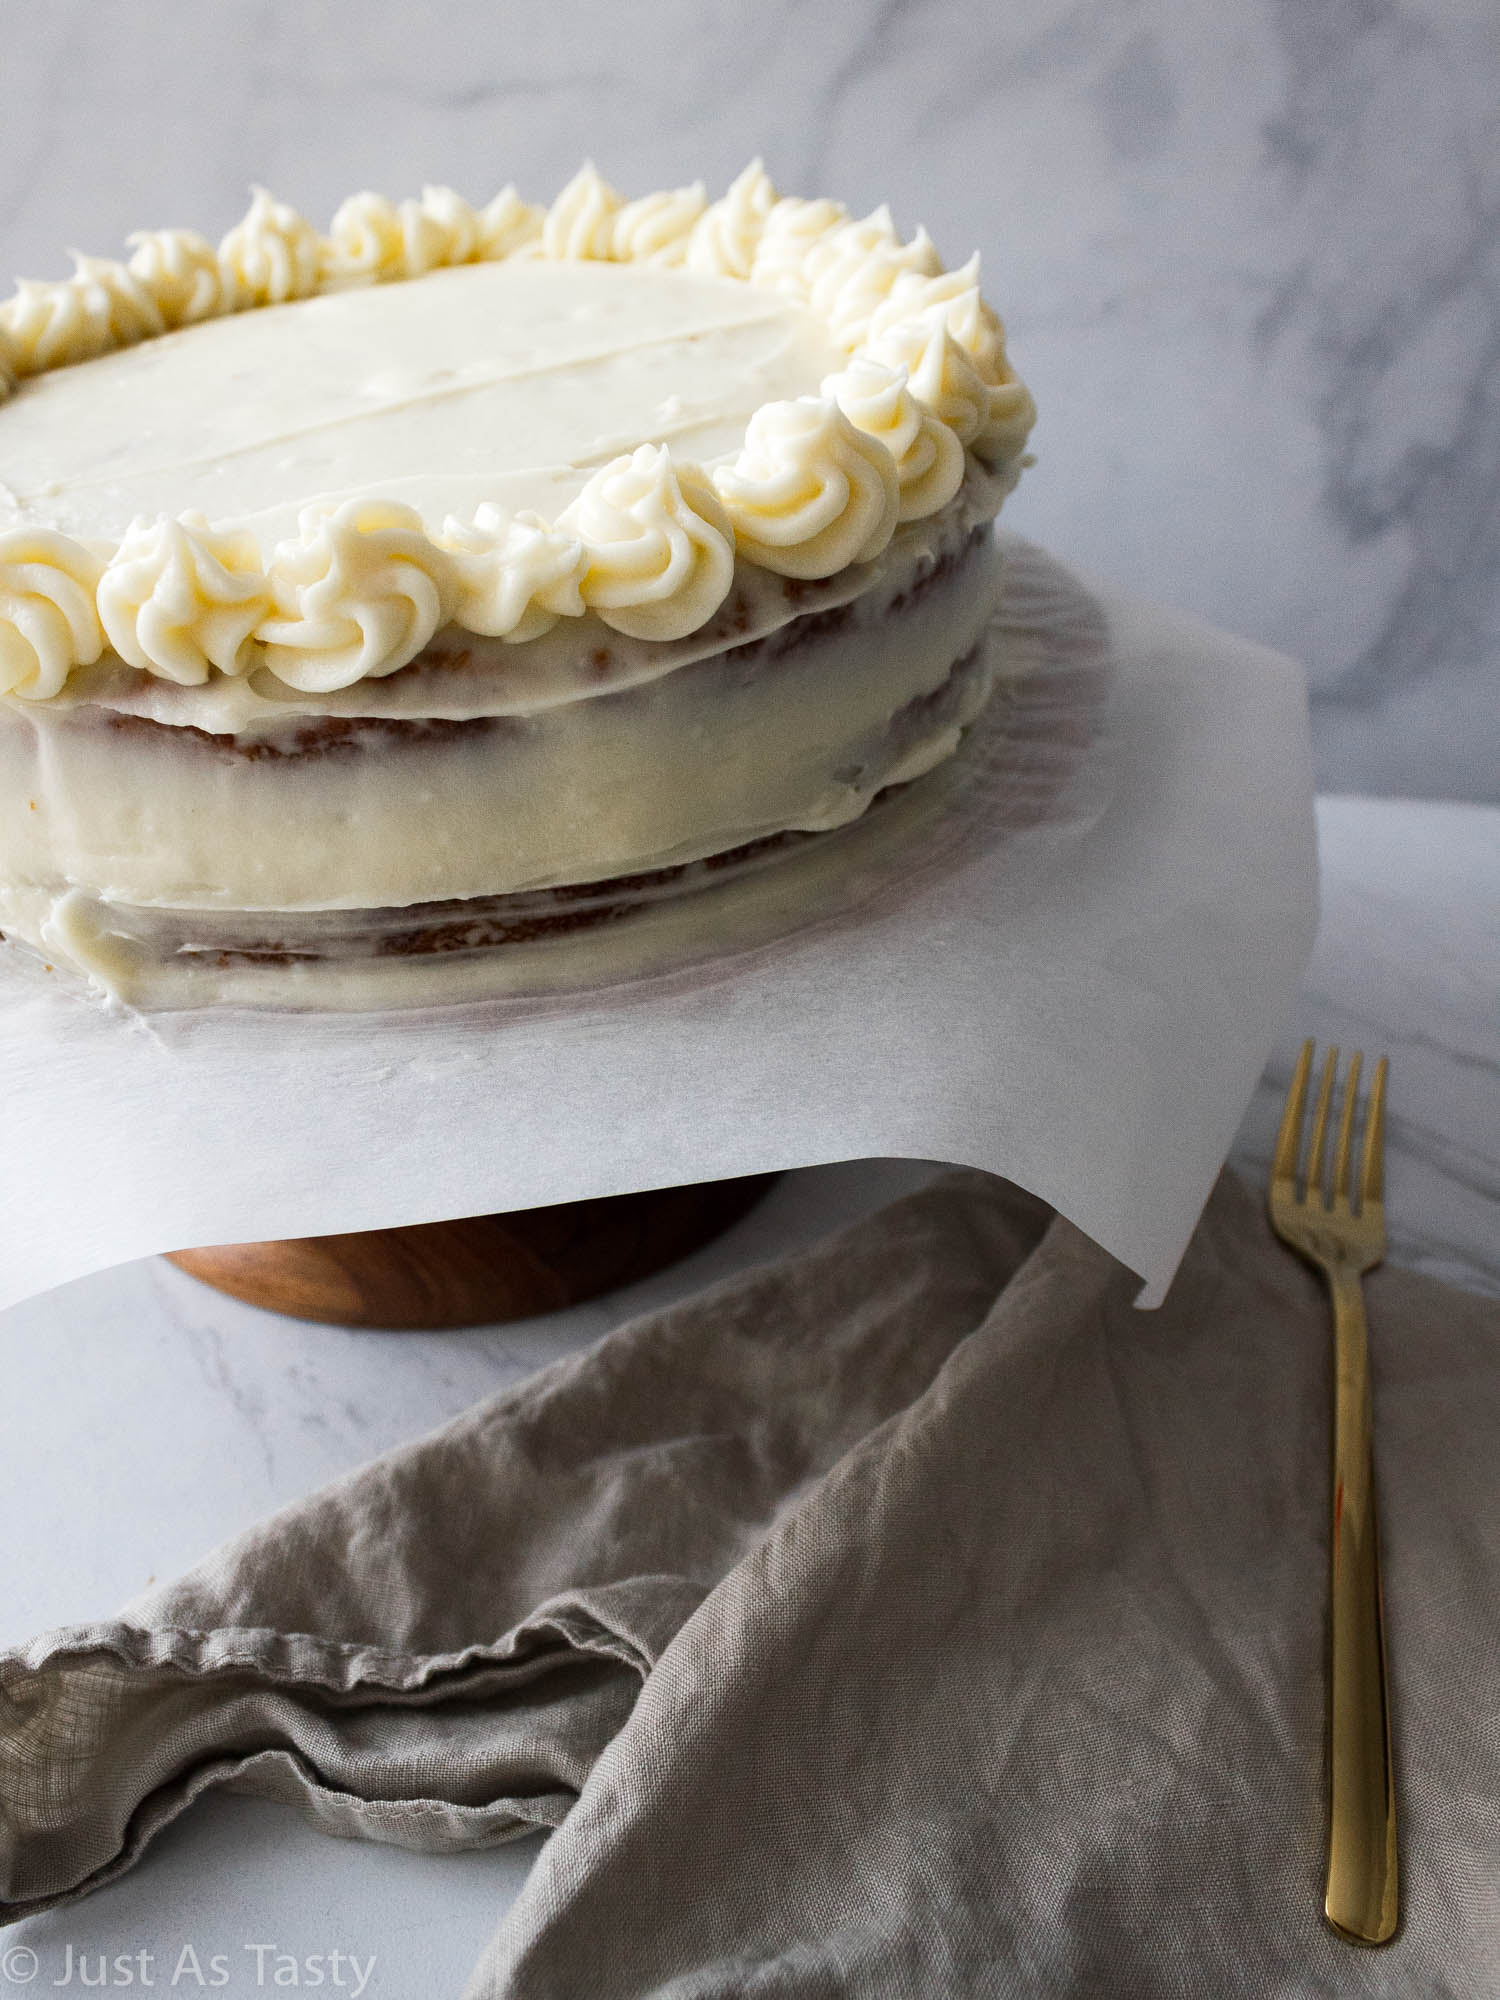 Frosted two layer cake on a cake stand.